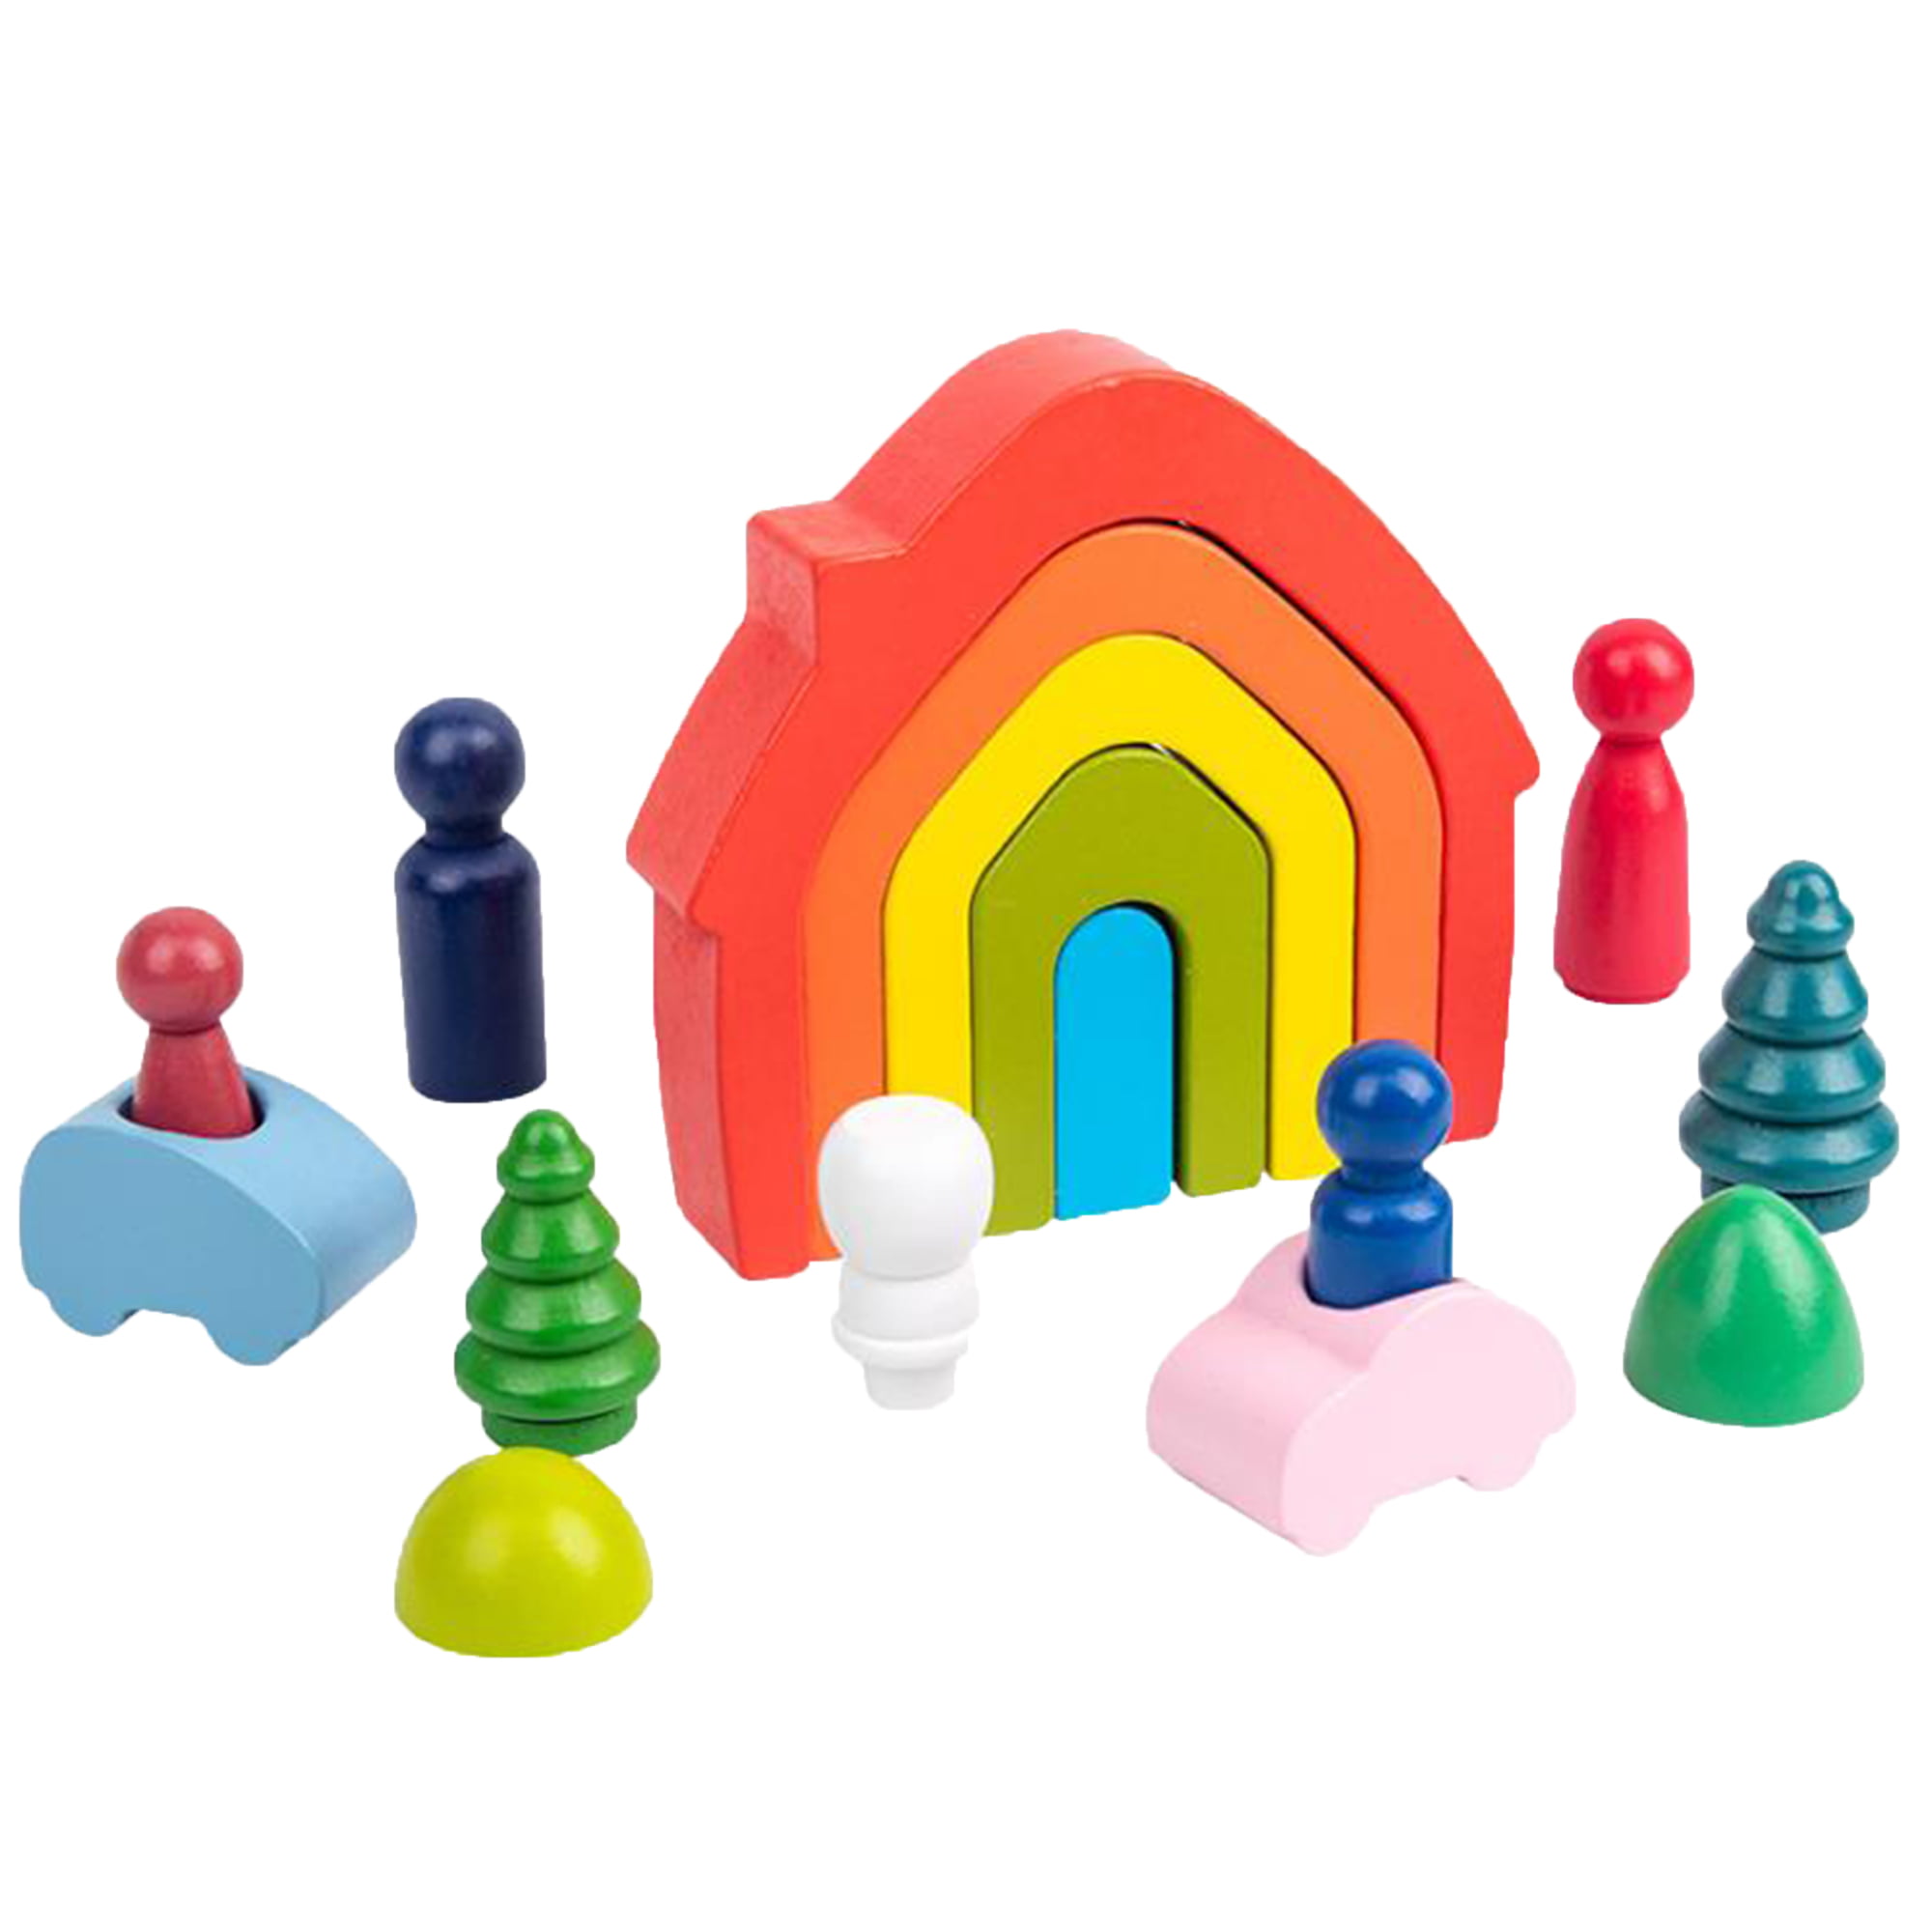 Wooden Rainbow Stacker Nesting Puzzle Blocks,Learning Toy Geometry Building Blocks Creative Nesting Educational Toys for Kids and Toddlers 